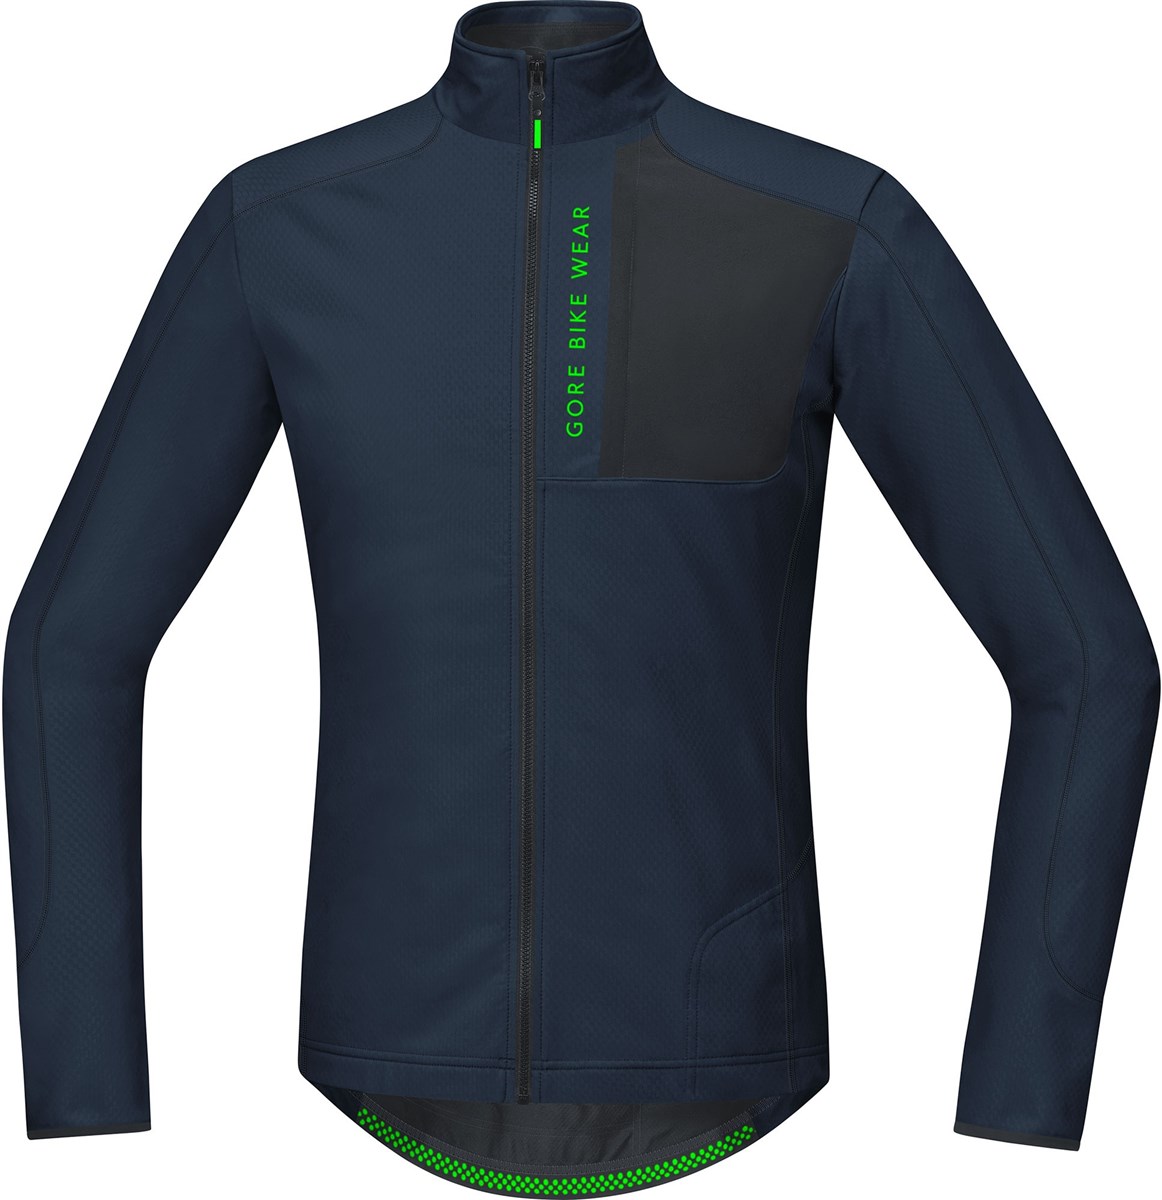 Gore Power Trail Thermo Jersey AW17 product image